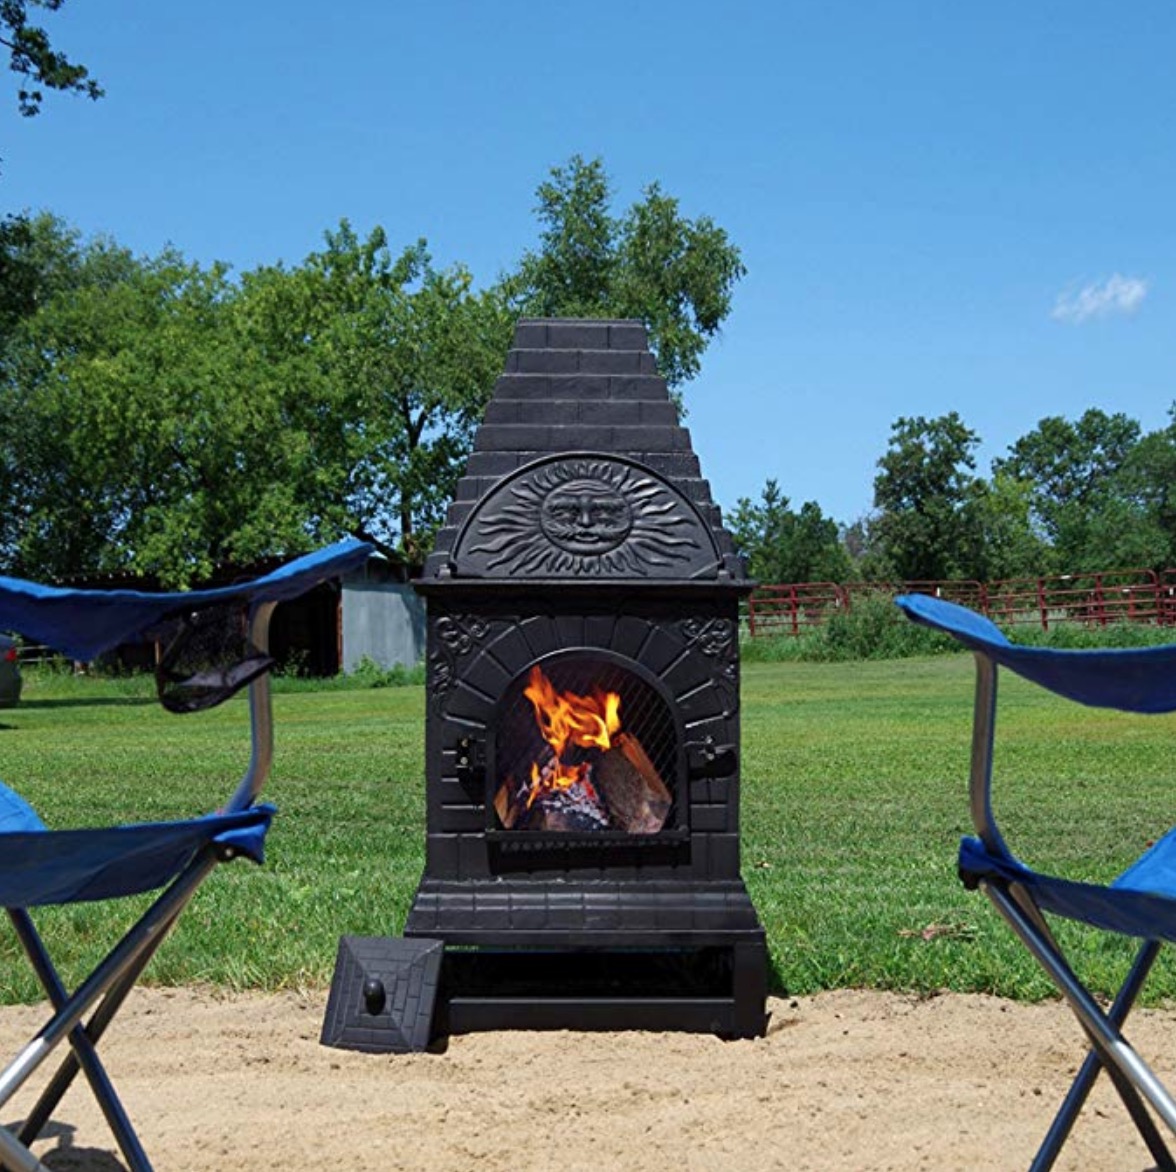 Review Of The 5 Best Cast Iron Chimineas, Chiminea Vs Fire Pit Reddit